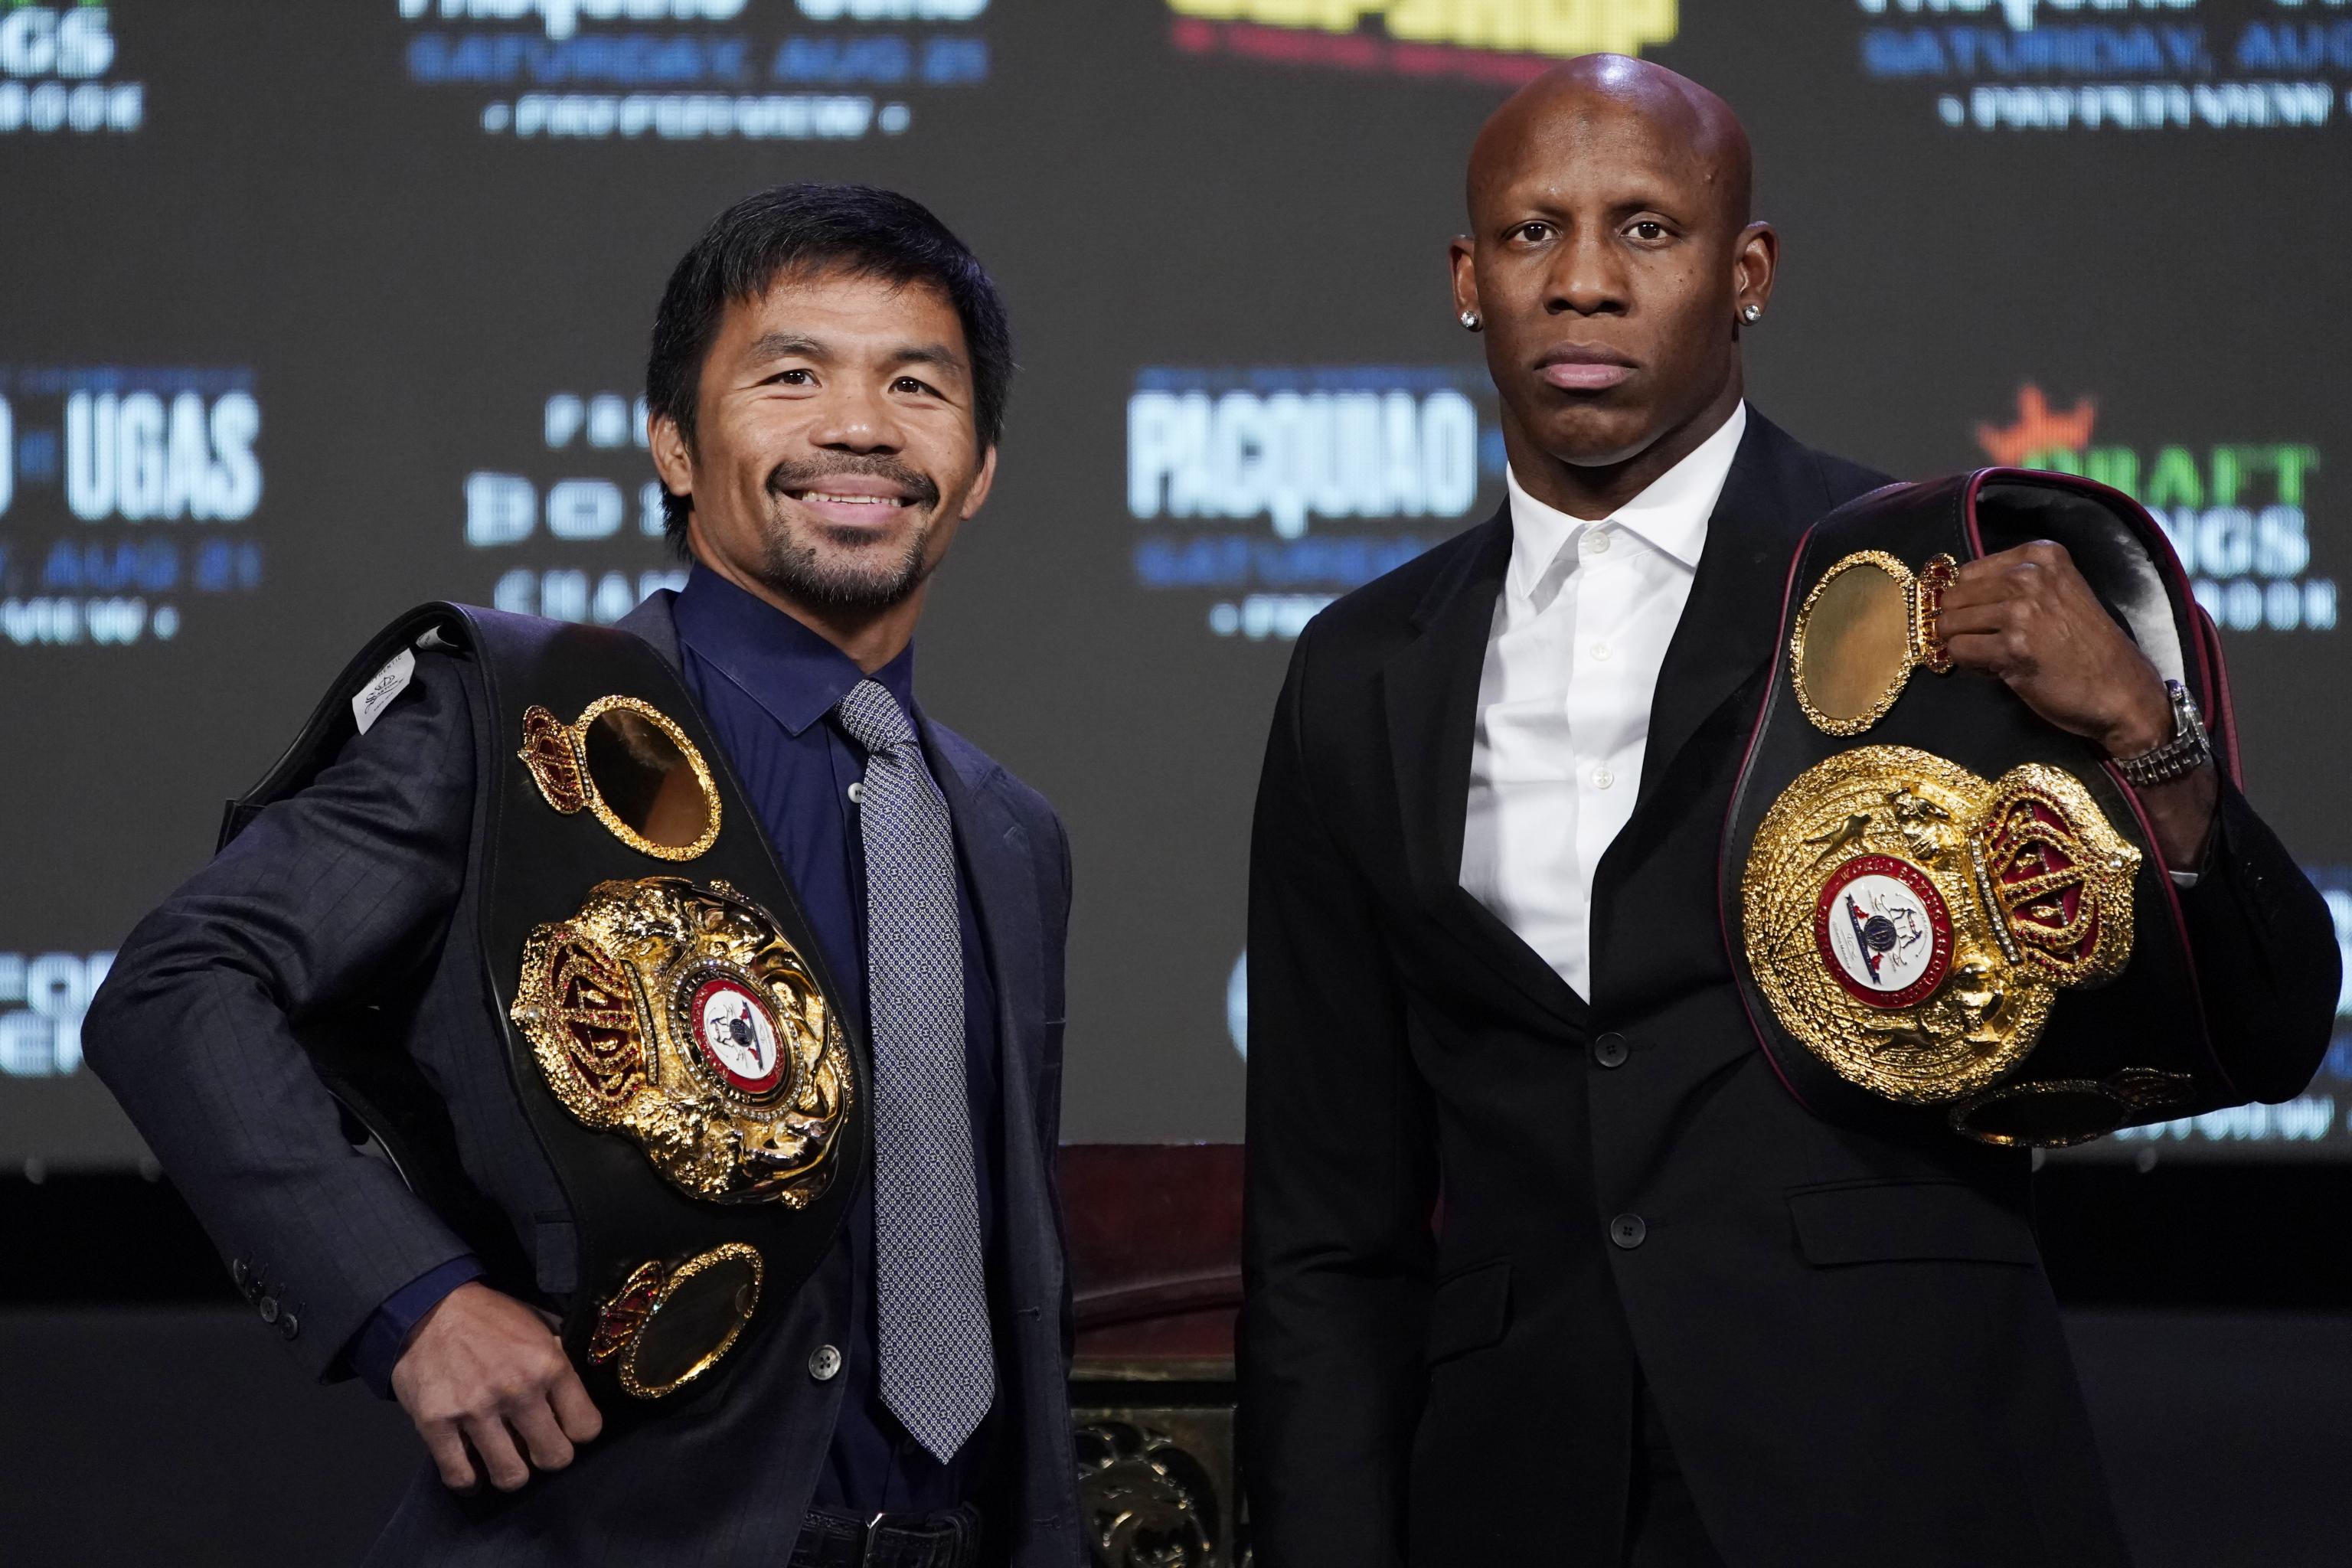 Manny Pacquiao vs. Yordenis Ugas fight results, highlights: Cuban champ  upsets Filipino legend to retain title 